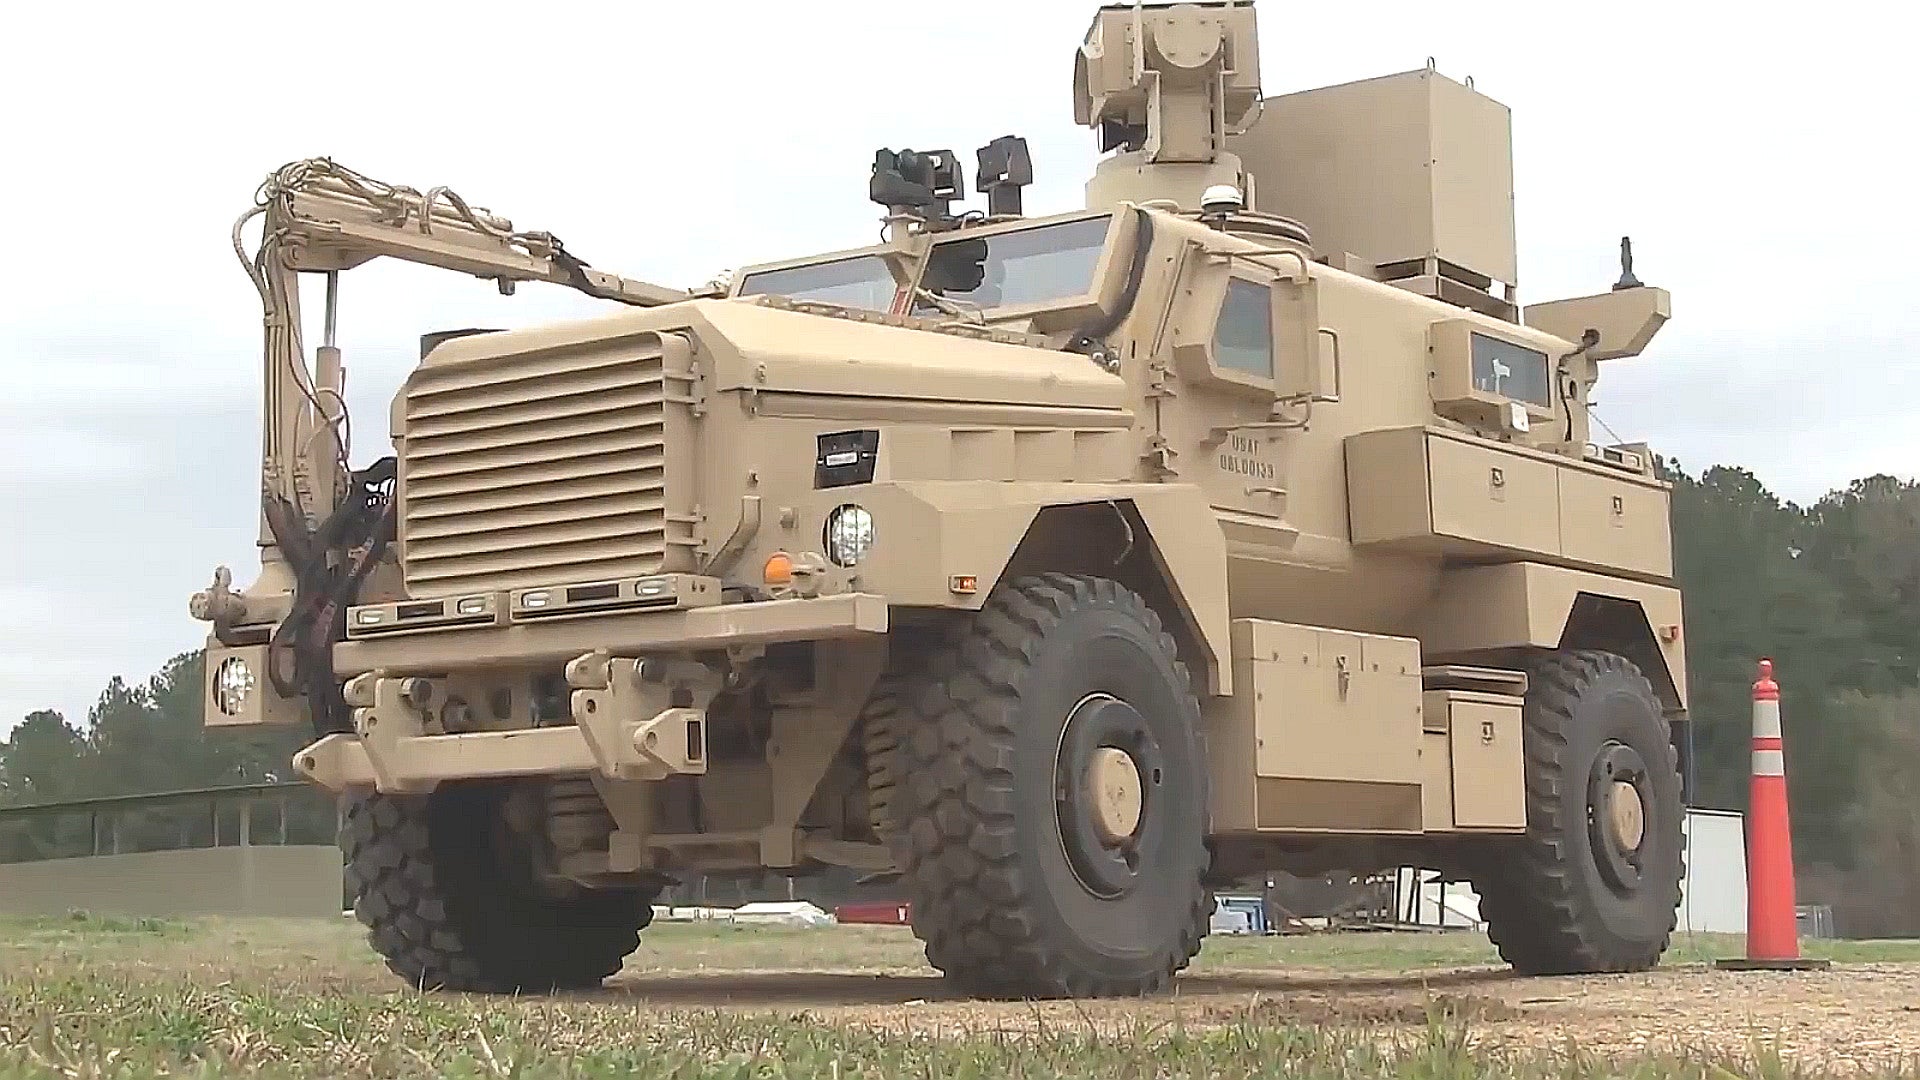 USAF Bomb Disposal Units Will Soon Get Laser-Armed Trucks To Rapidly Clear Mined Airfields